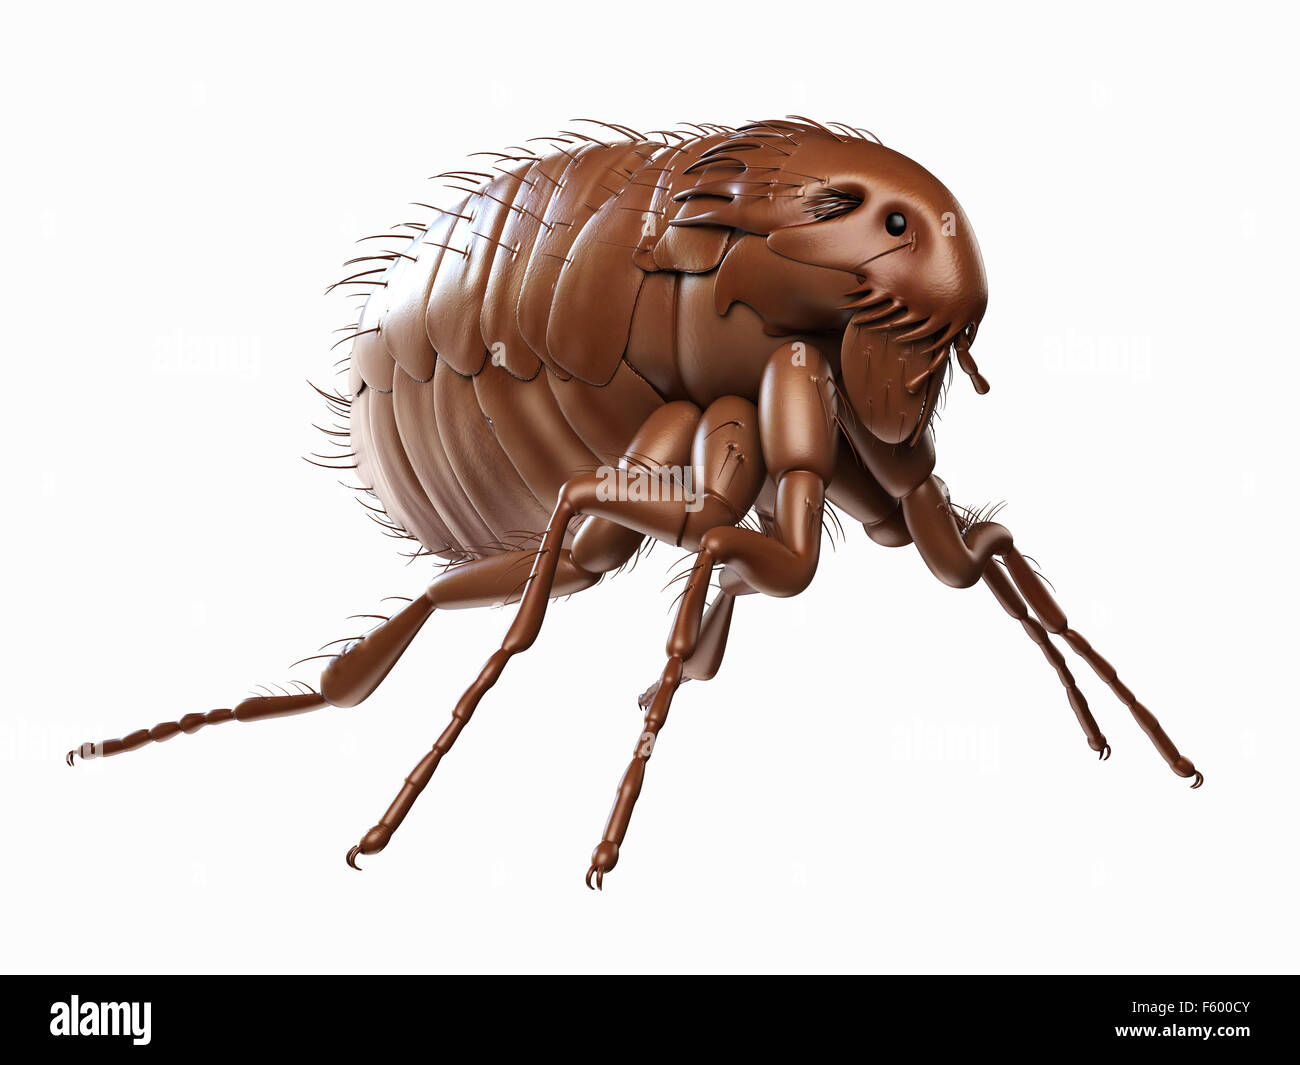 medically accurate illustration of a flea Stock Photo